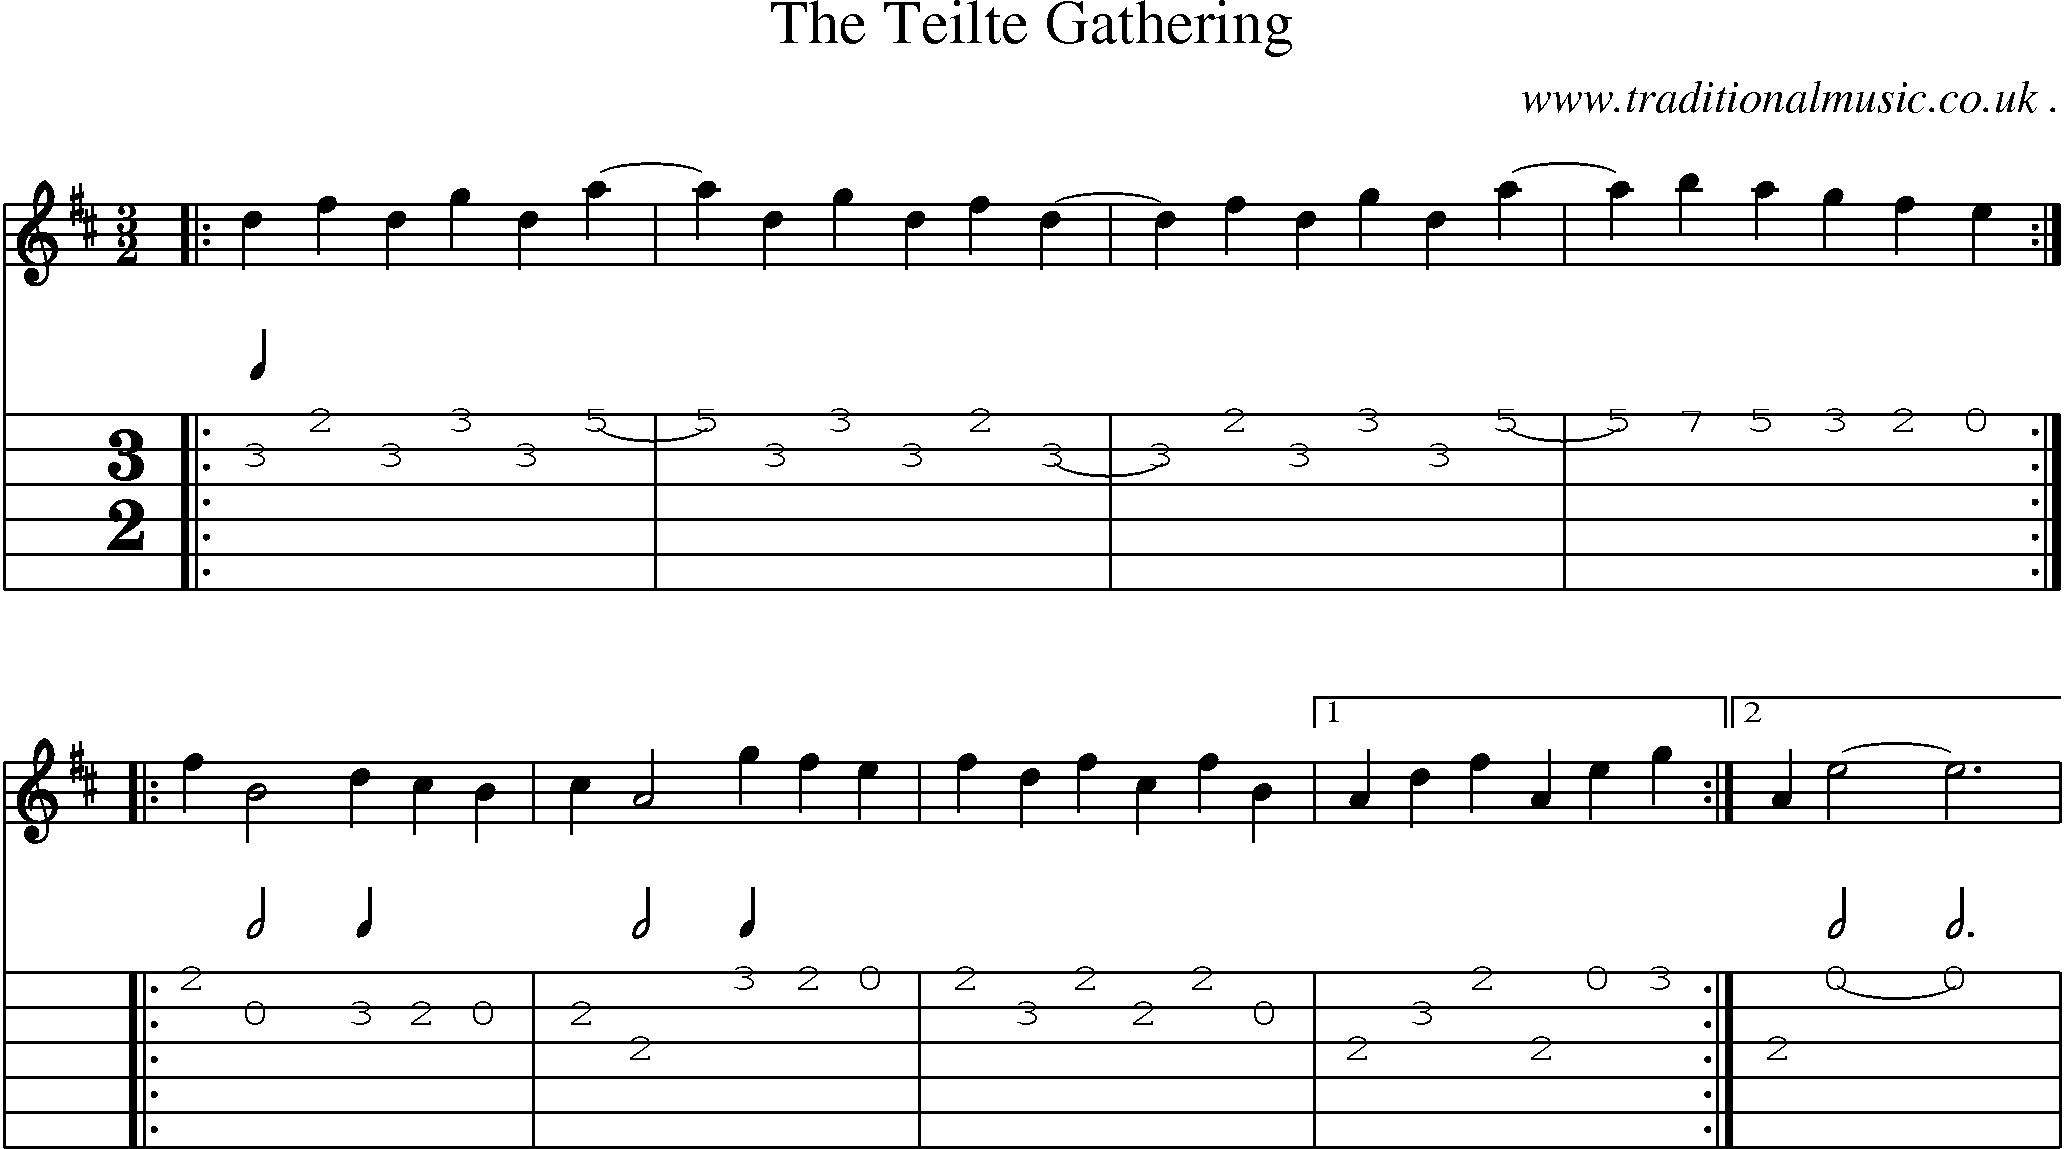 Sheet-Music and Guitar Tabs for The Teilte Gathering